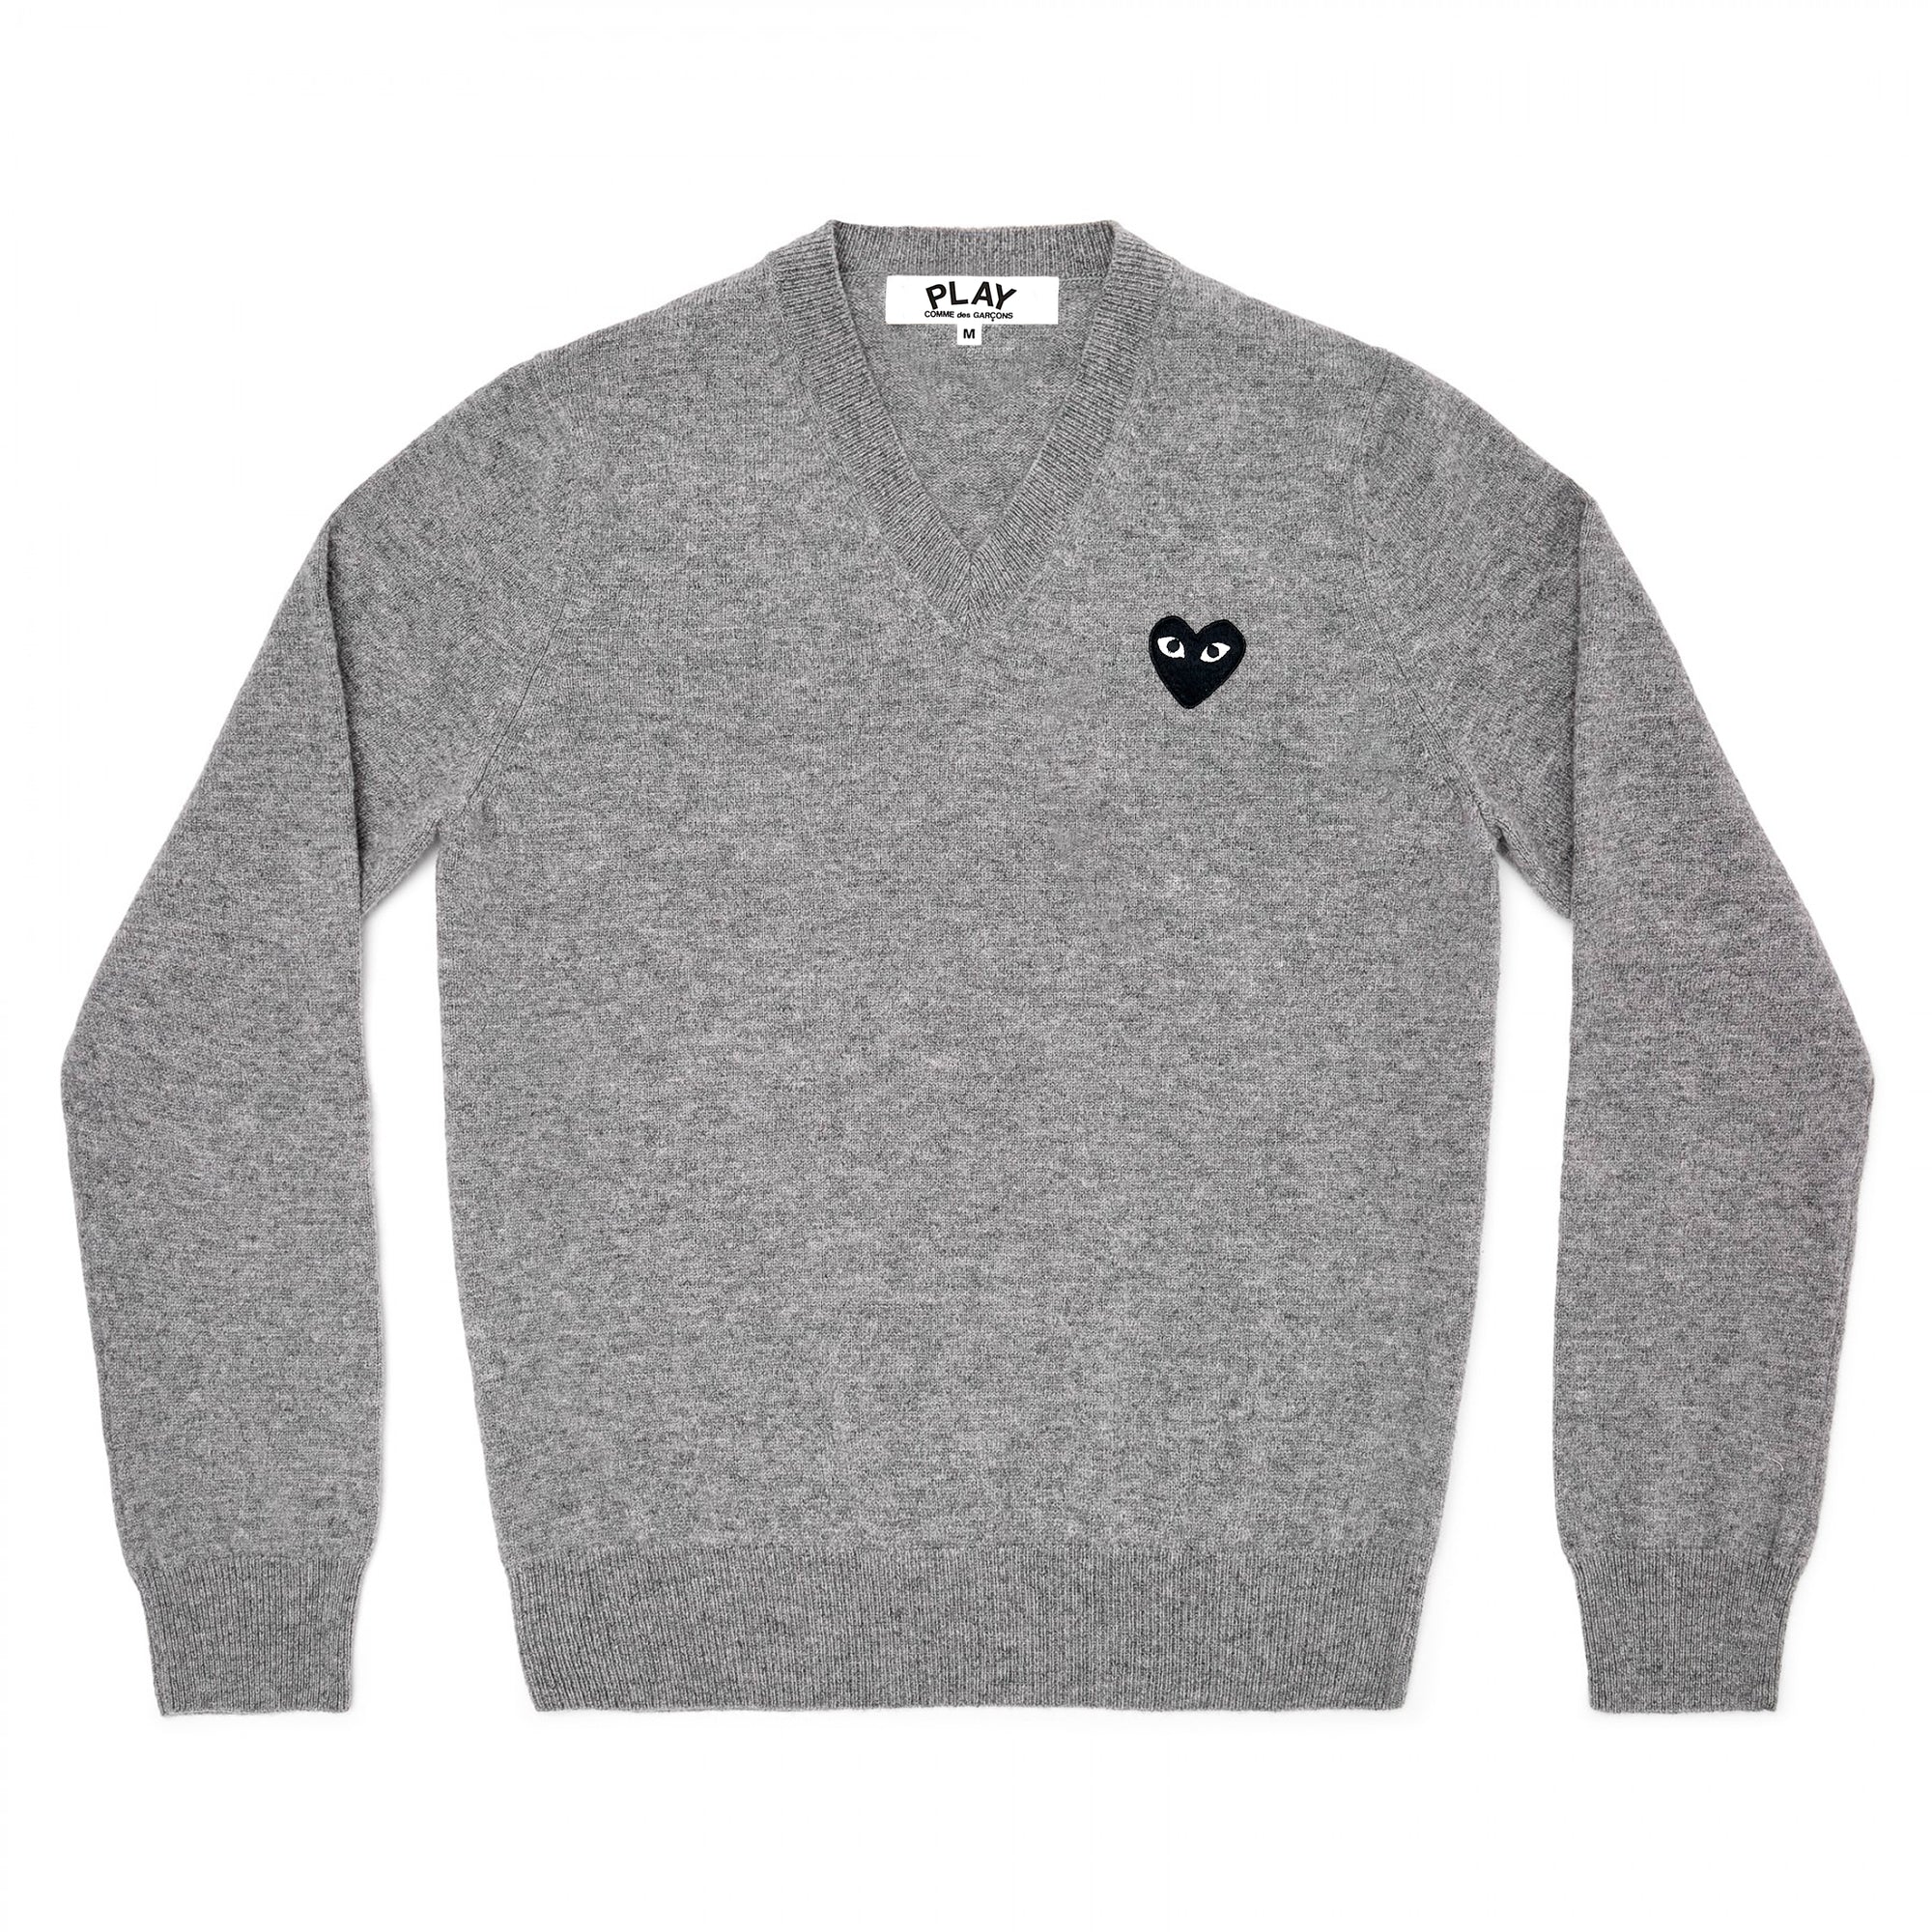 PLAY CDG - BLACK HEART V NECK SWEATER - (GREY) view 1